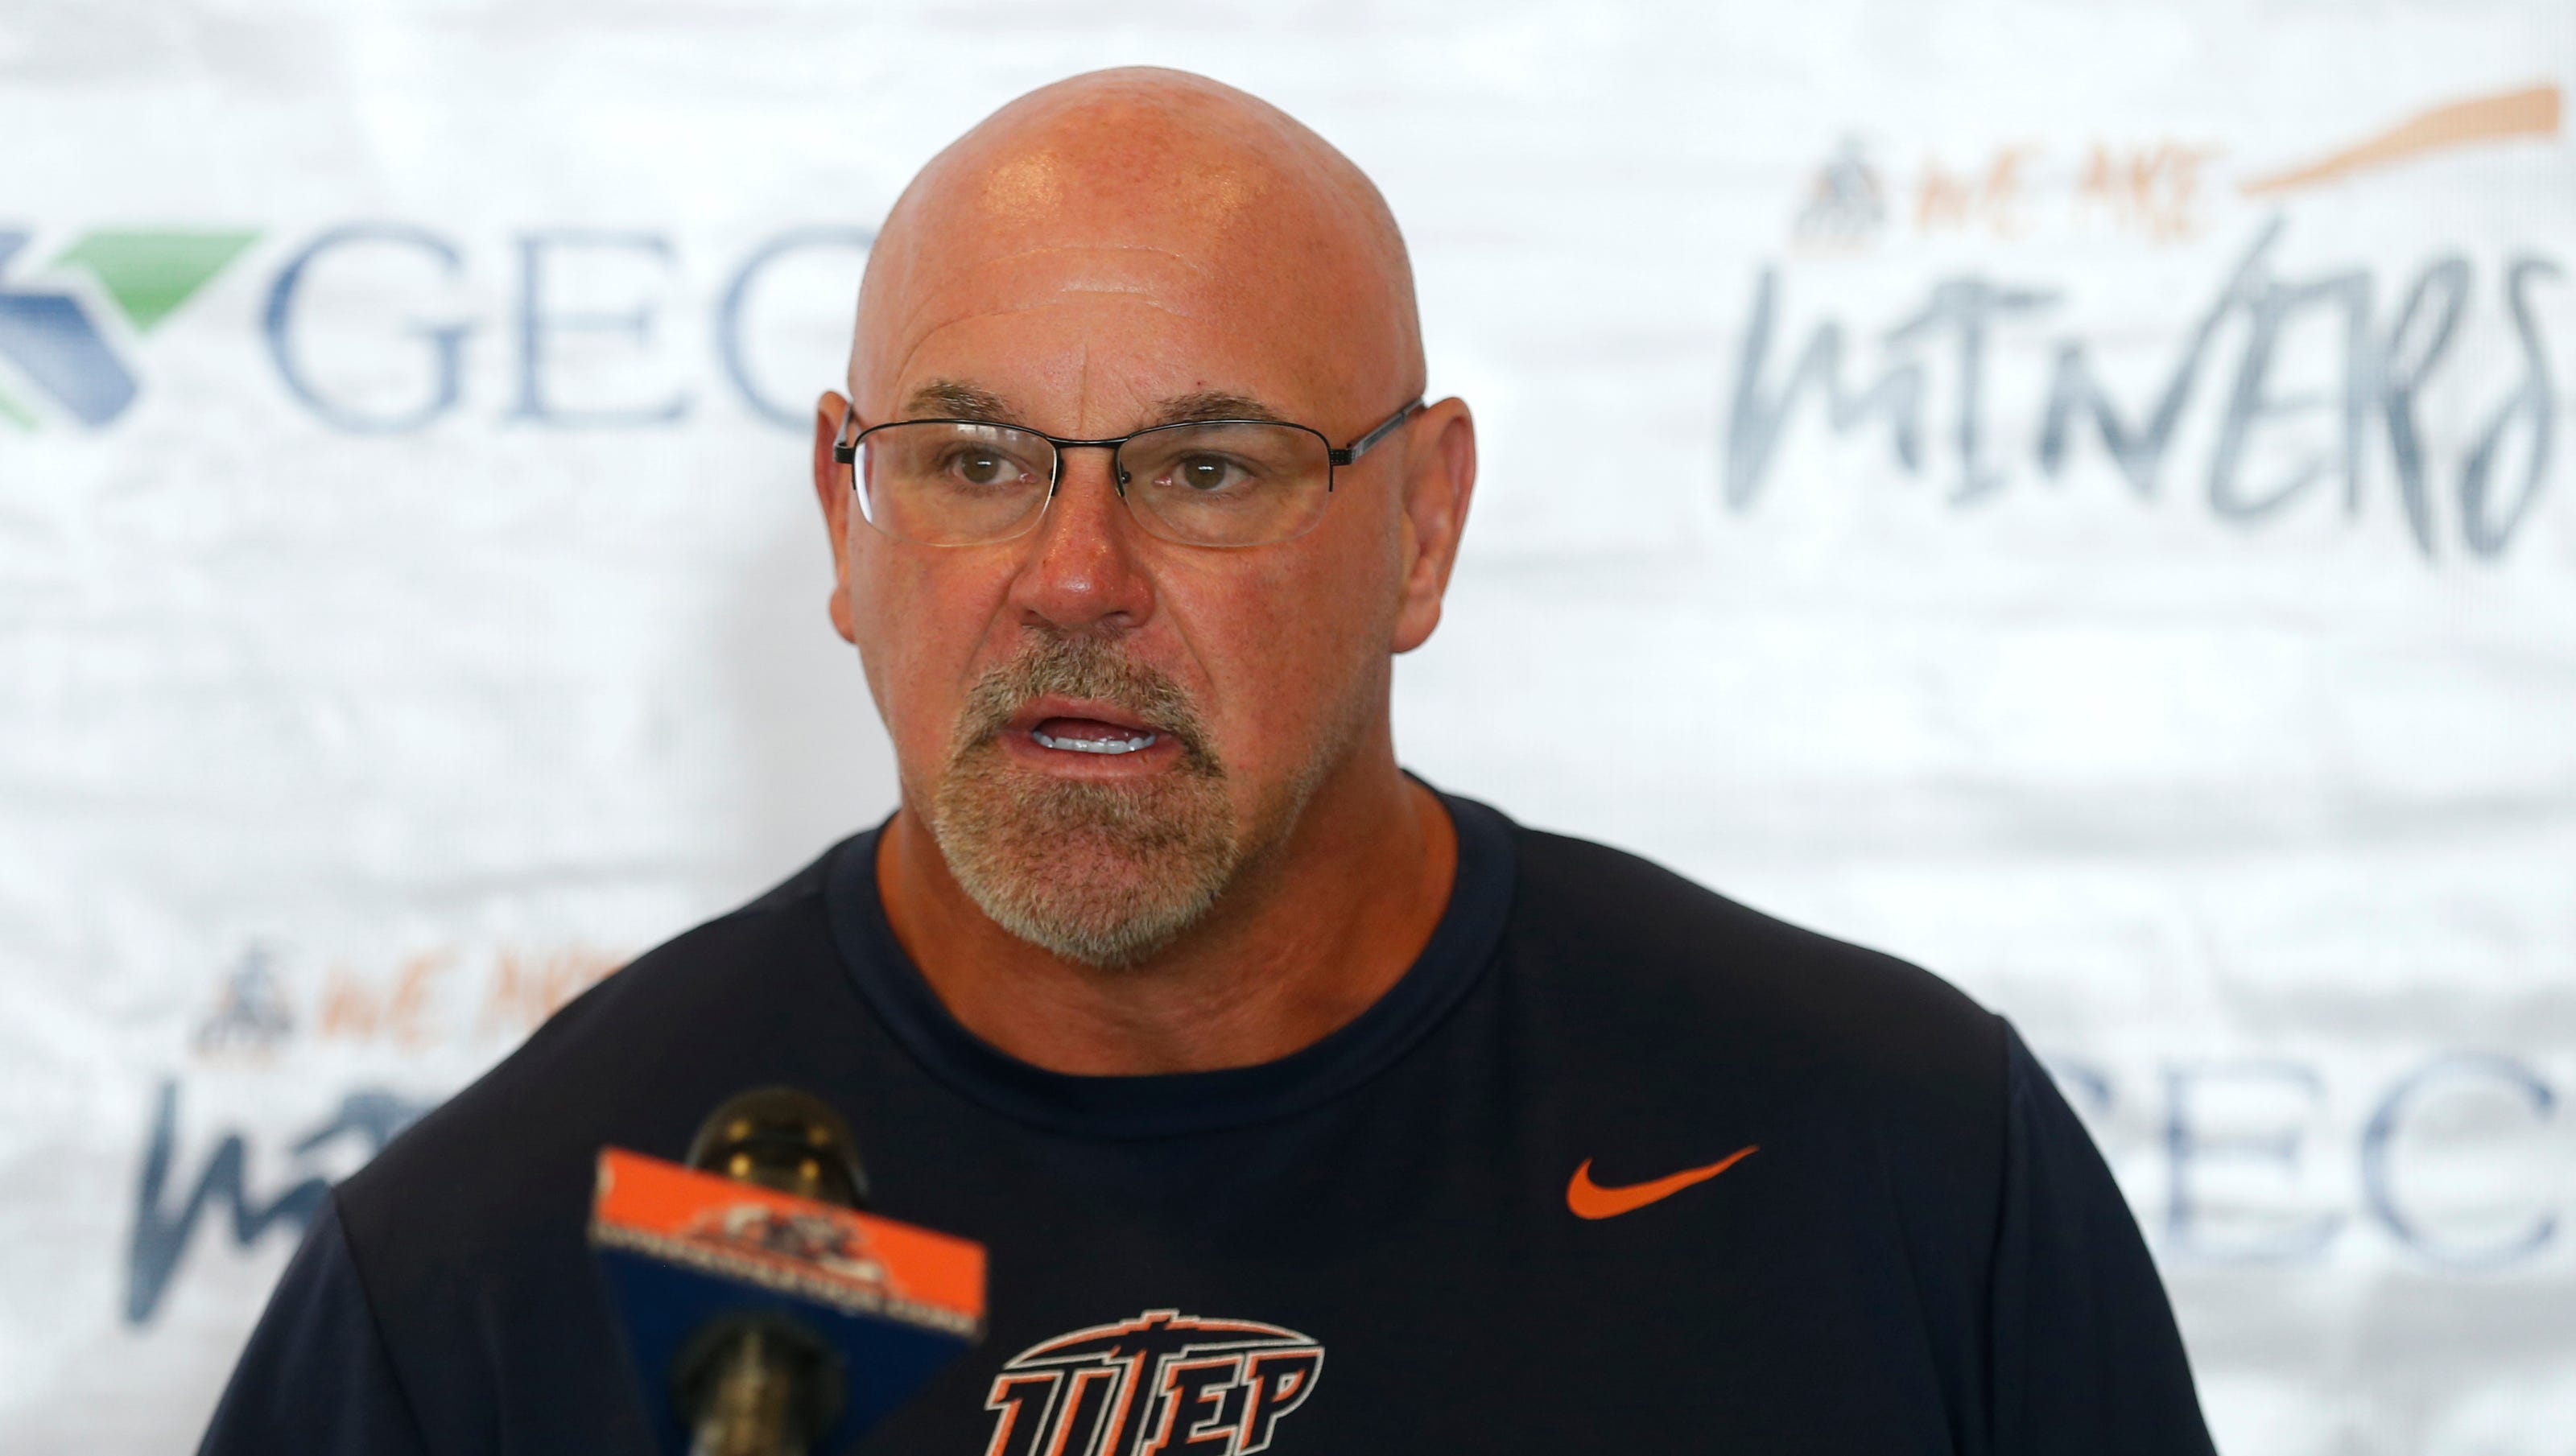 Former UTEP coach fired by Arizona Cardinals for groping woman